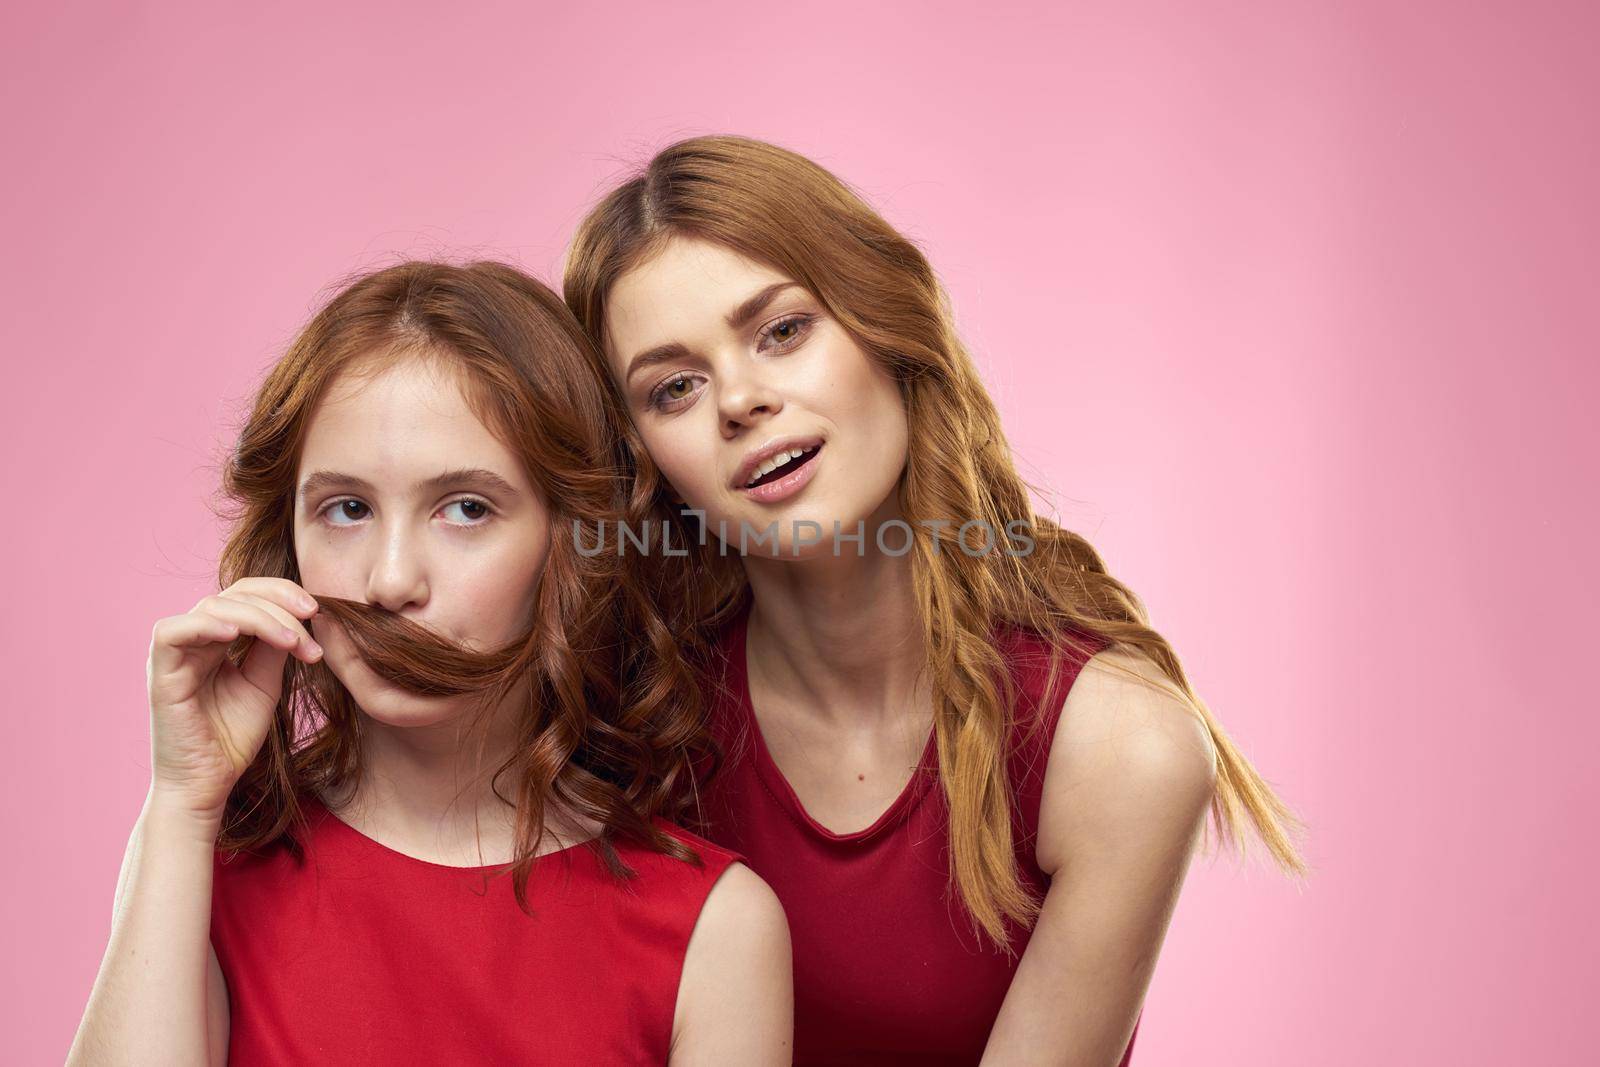 Mom and daughter fun communication family joy pink background cropped view. High quality photo